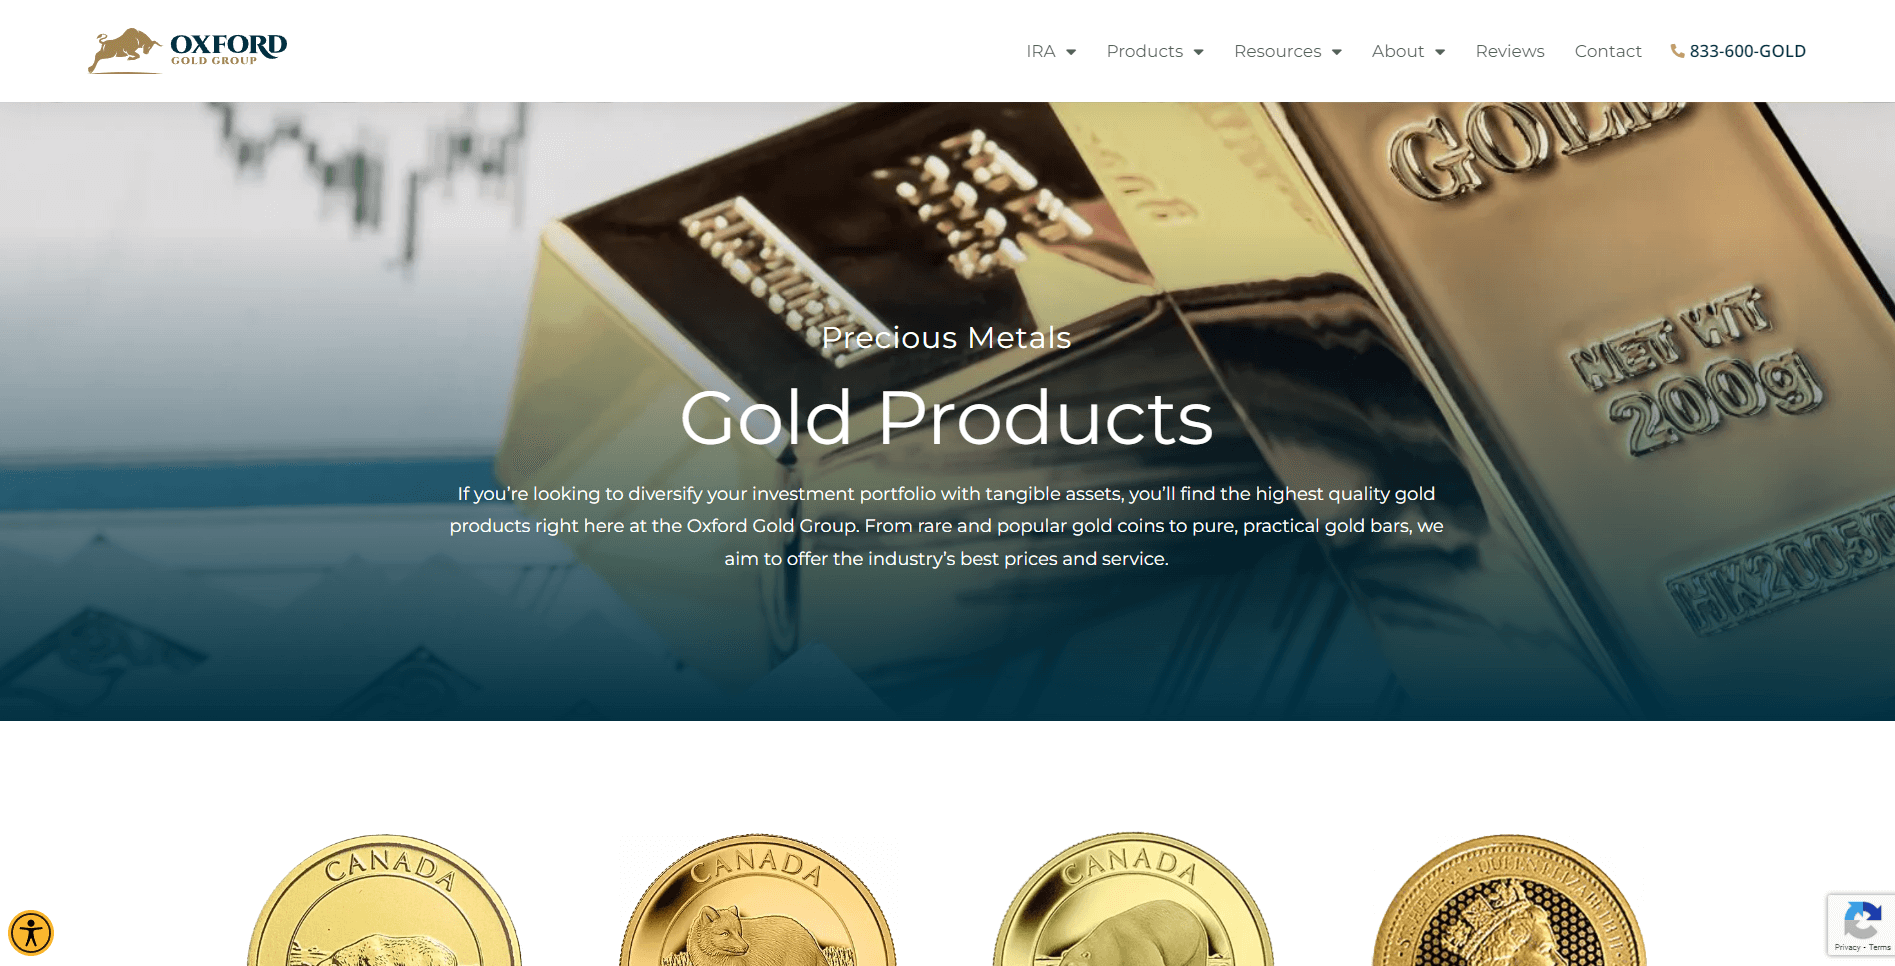 oxford gold group gold ira review products